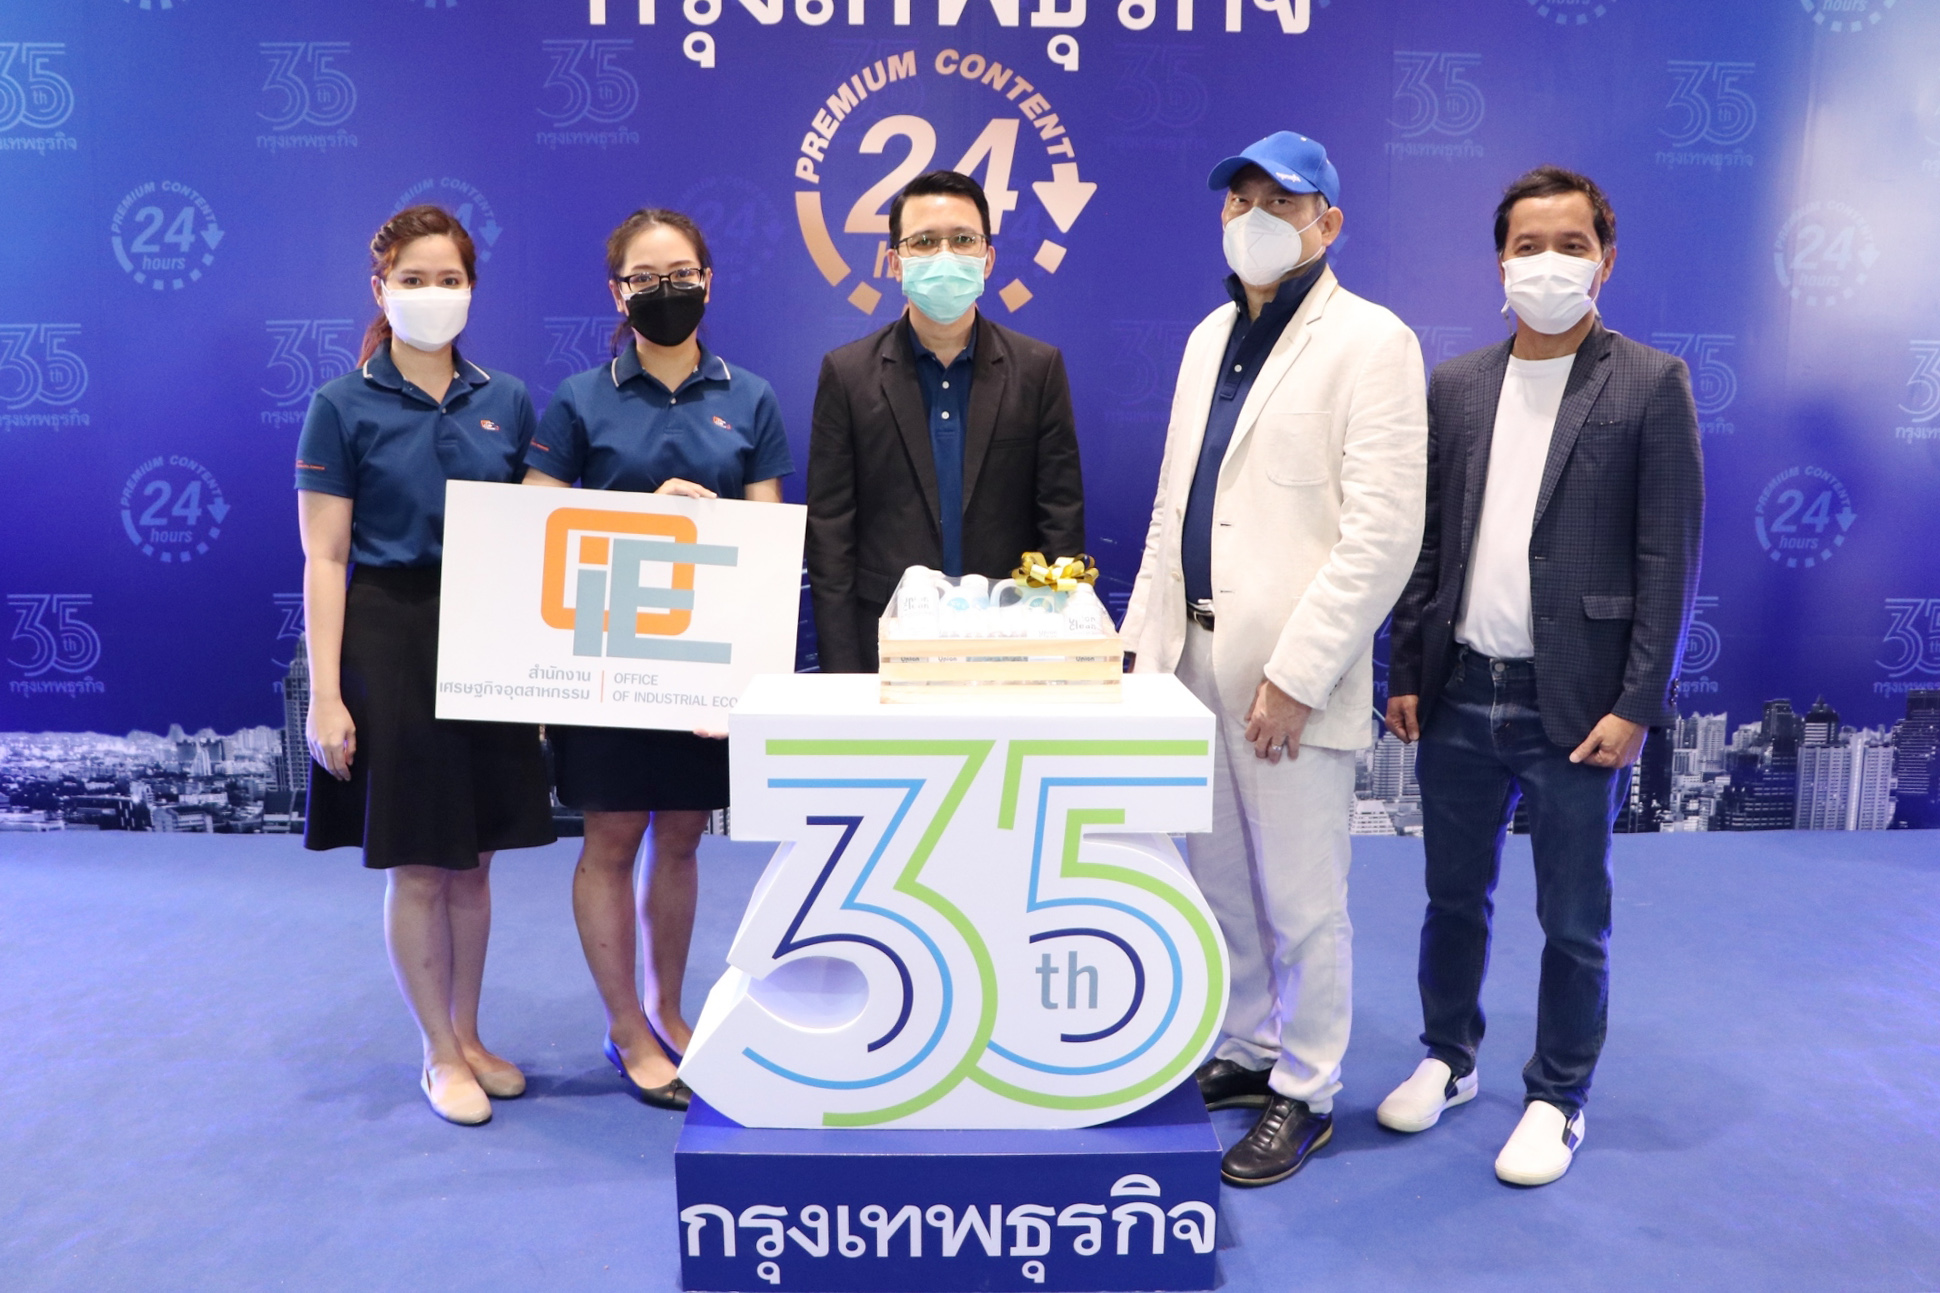 OIE joins to congratulate Krungthep Turakij newspaper on the occasion of the anniversary and stepping into the 35th year